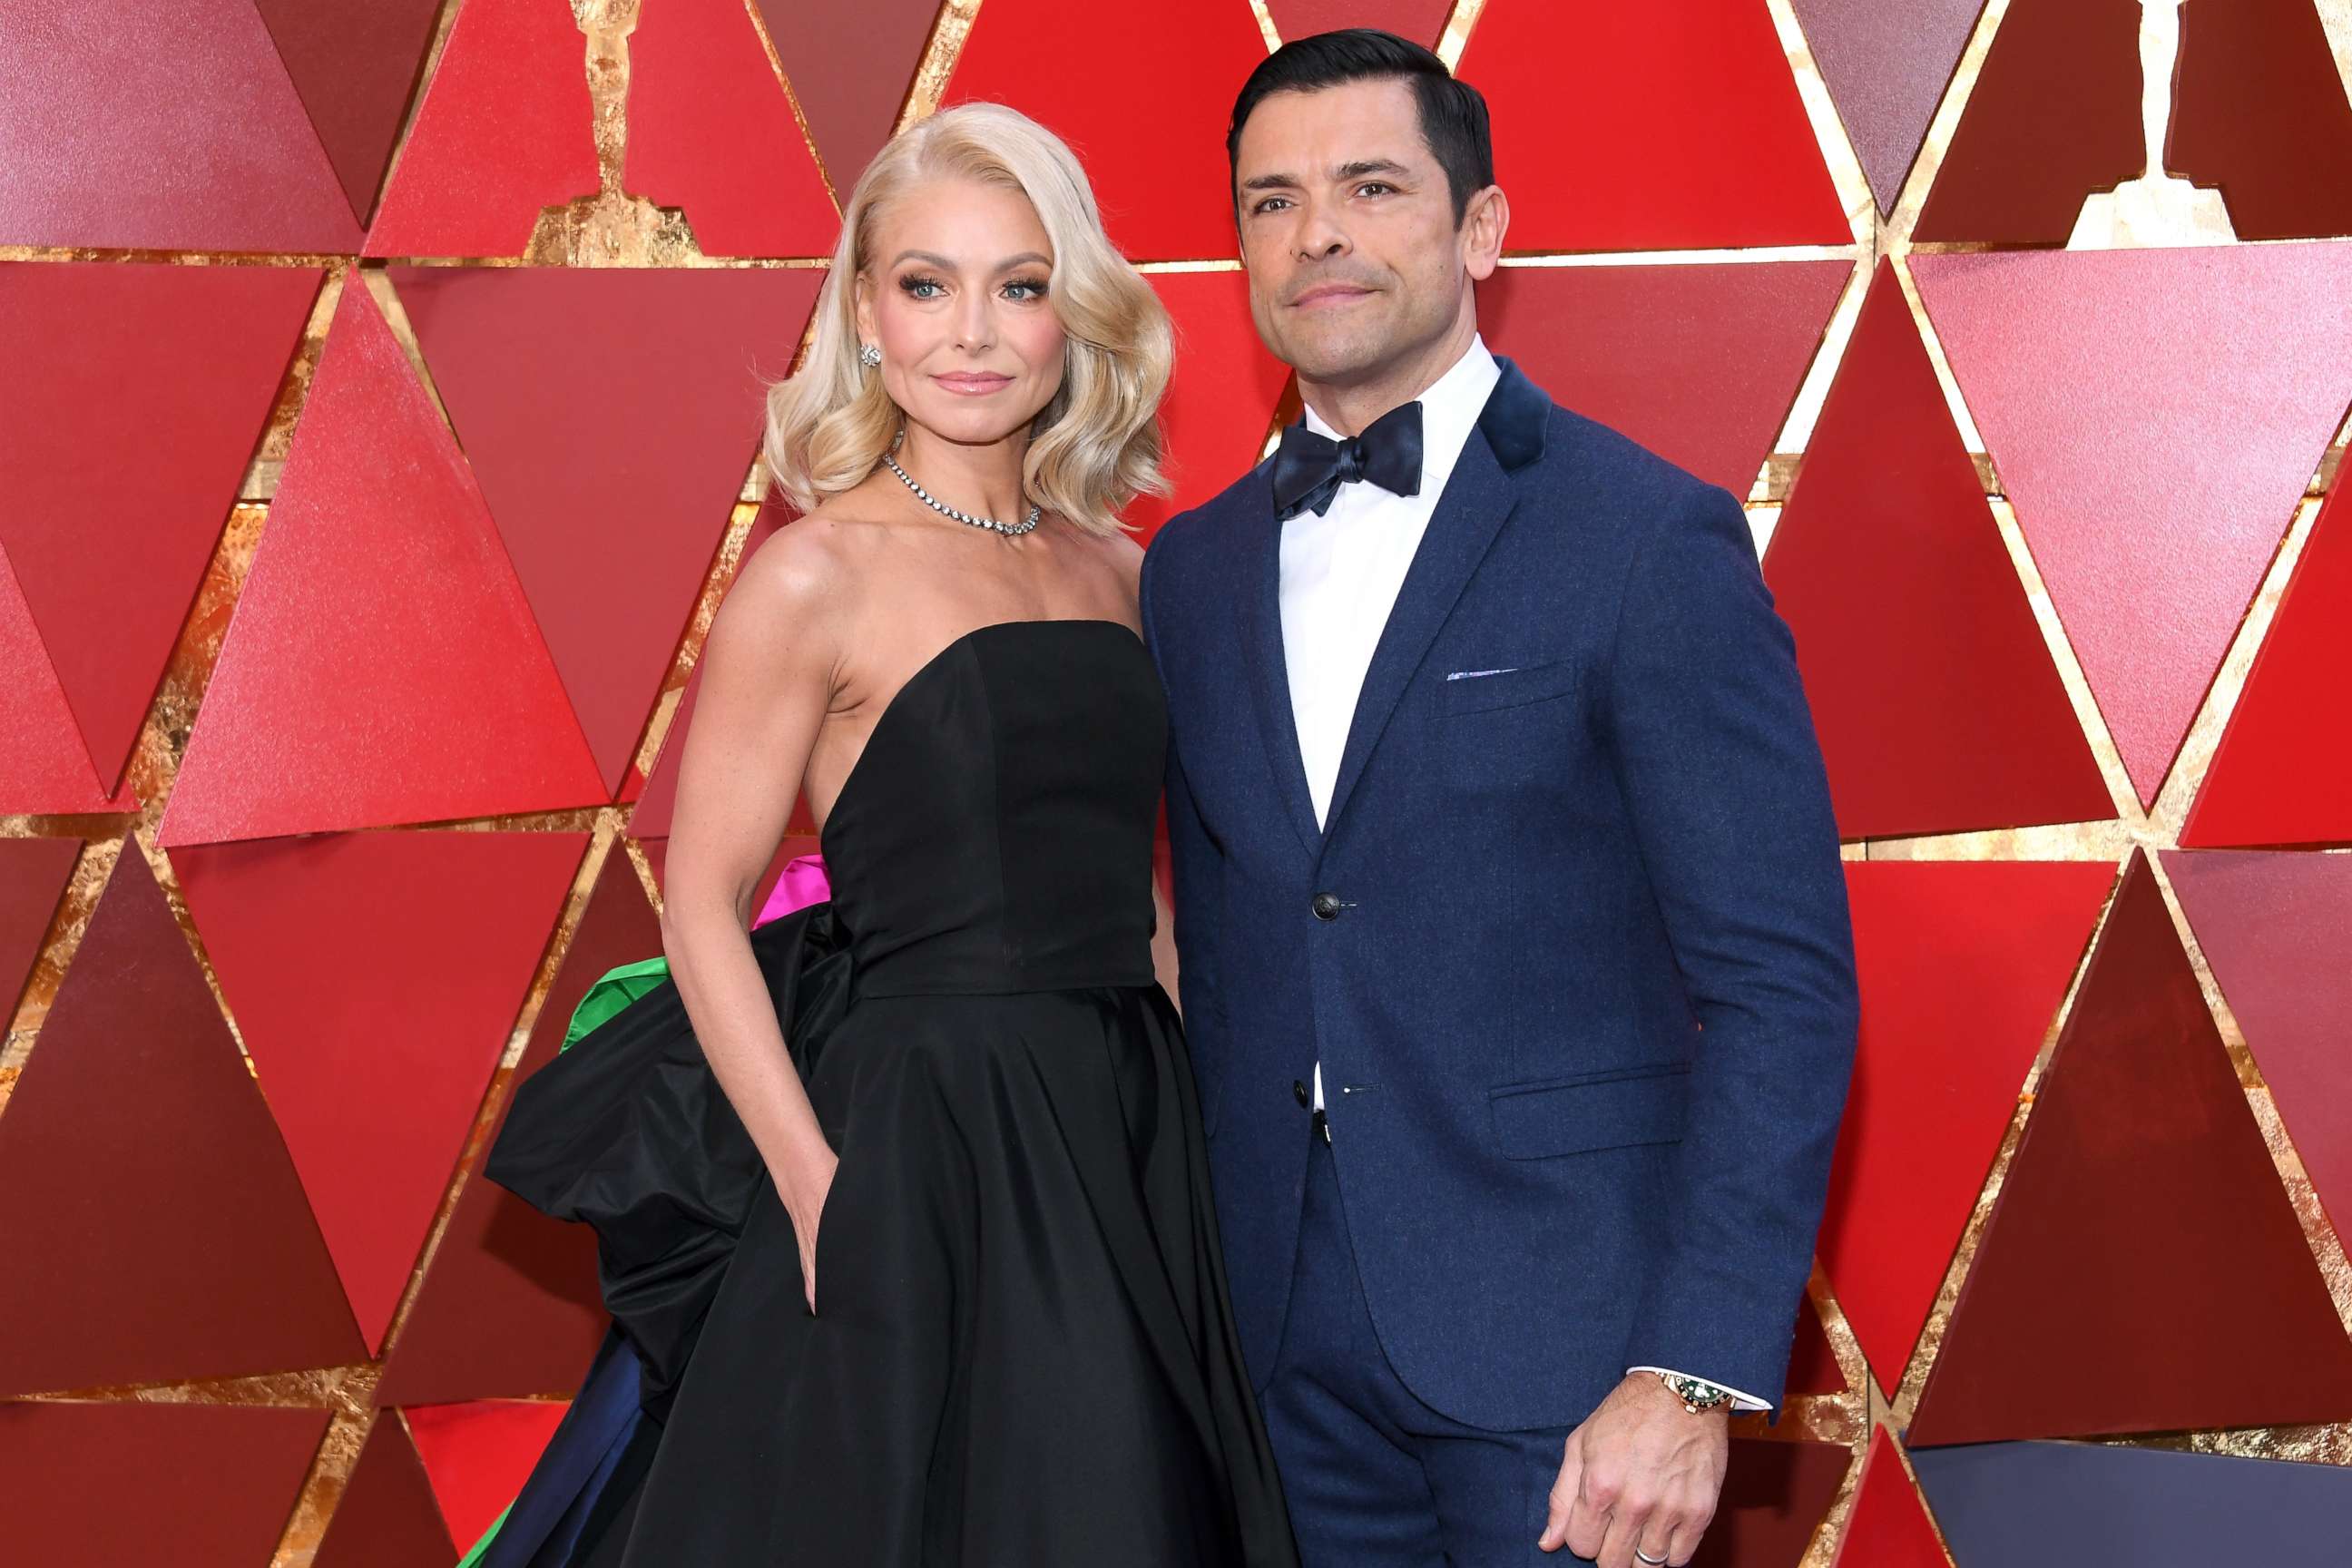 PHOTO: Kelly Ripa and Mark Consuelos attend the 90th Annual Academy Awards at Hollywood & Highland Center, March 4, 2018, in Hollywood, Calif.